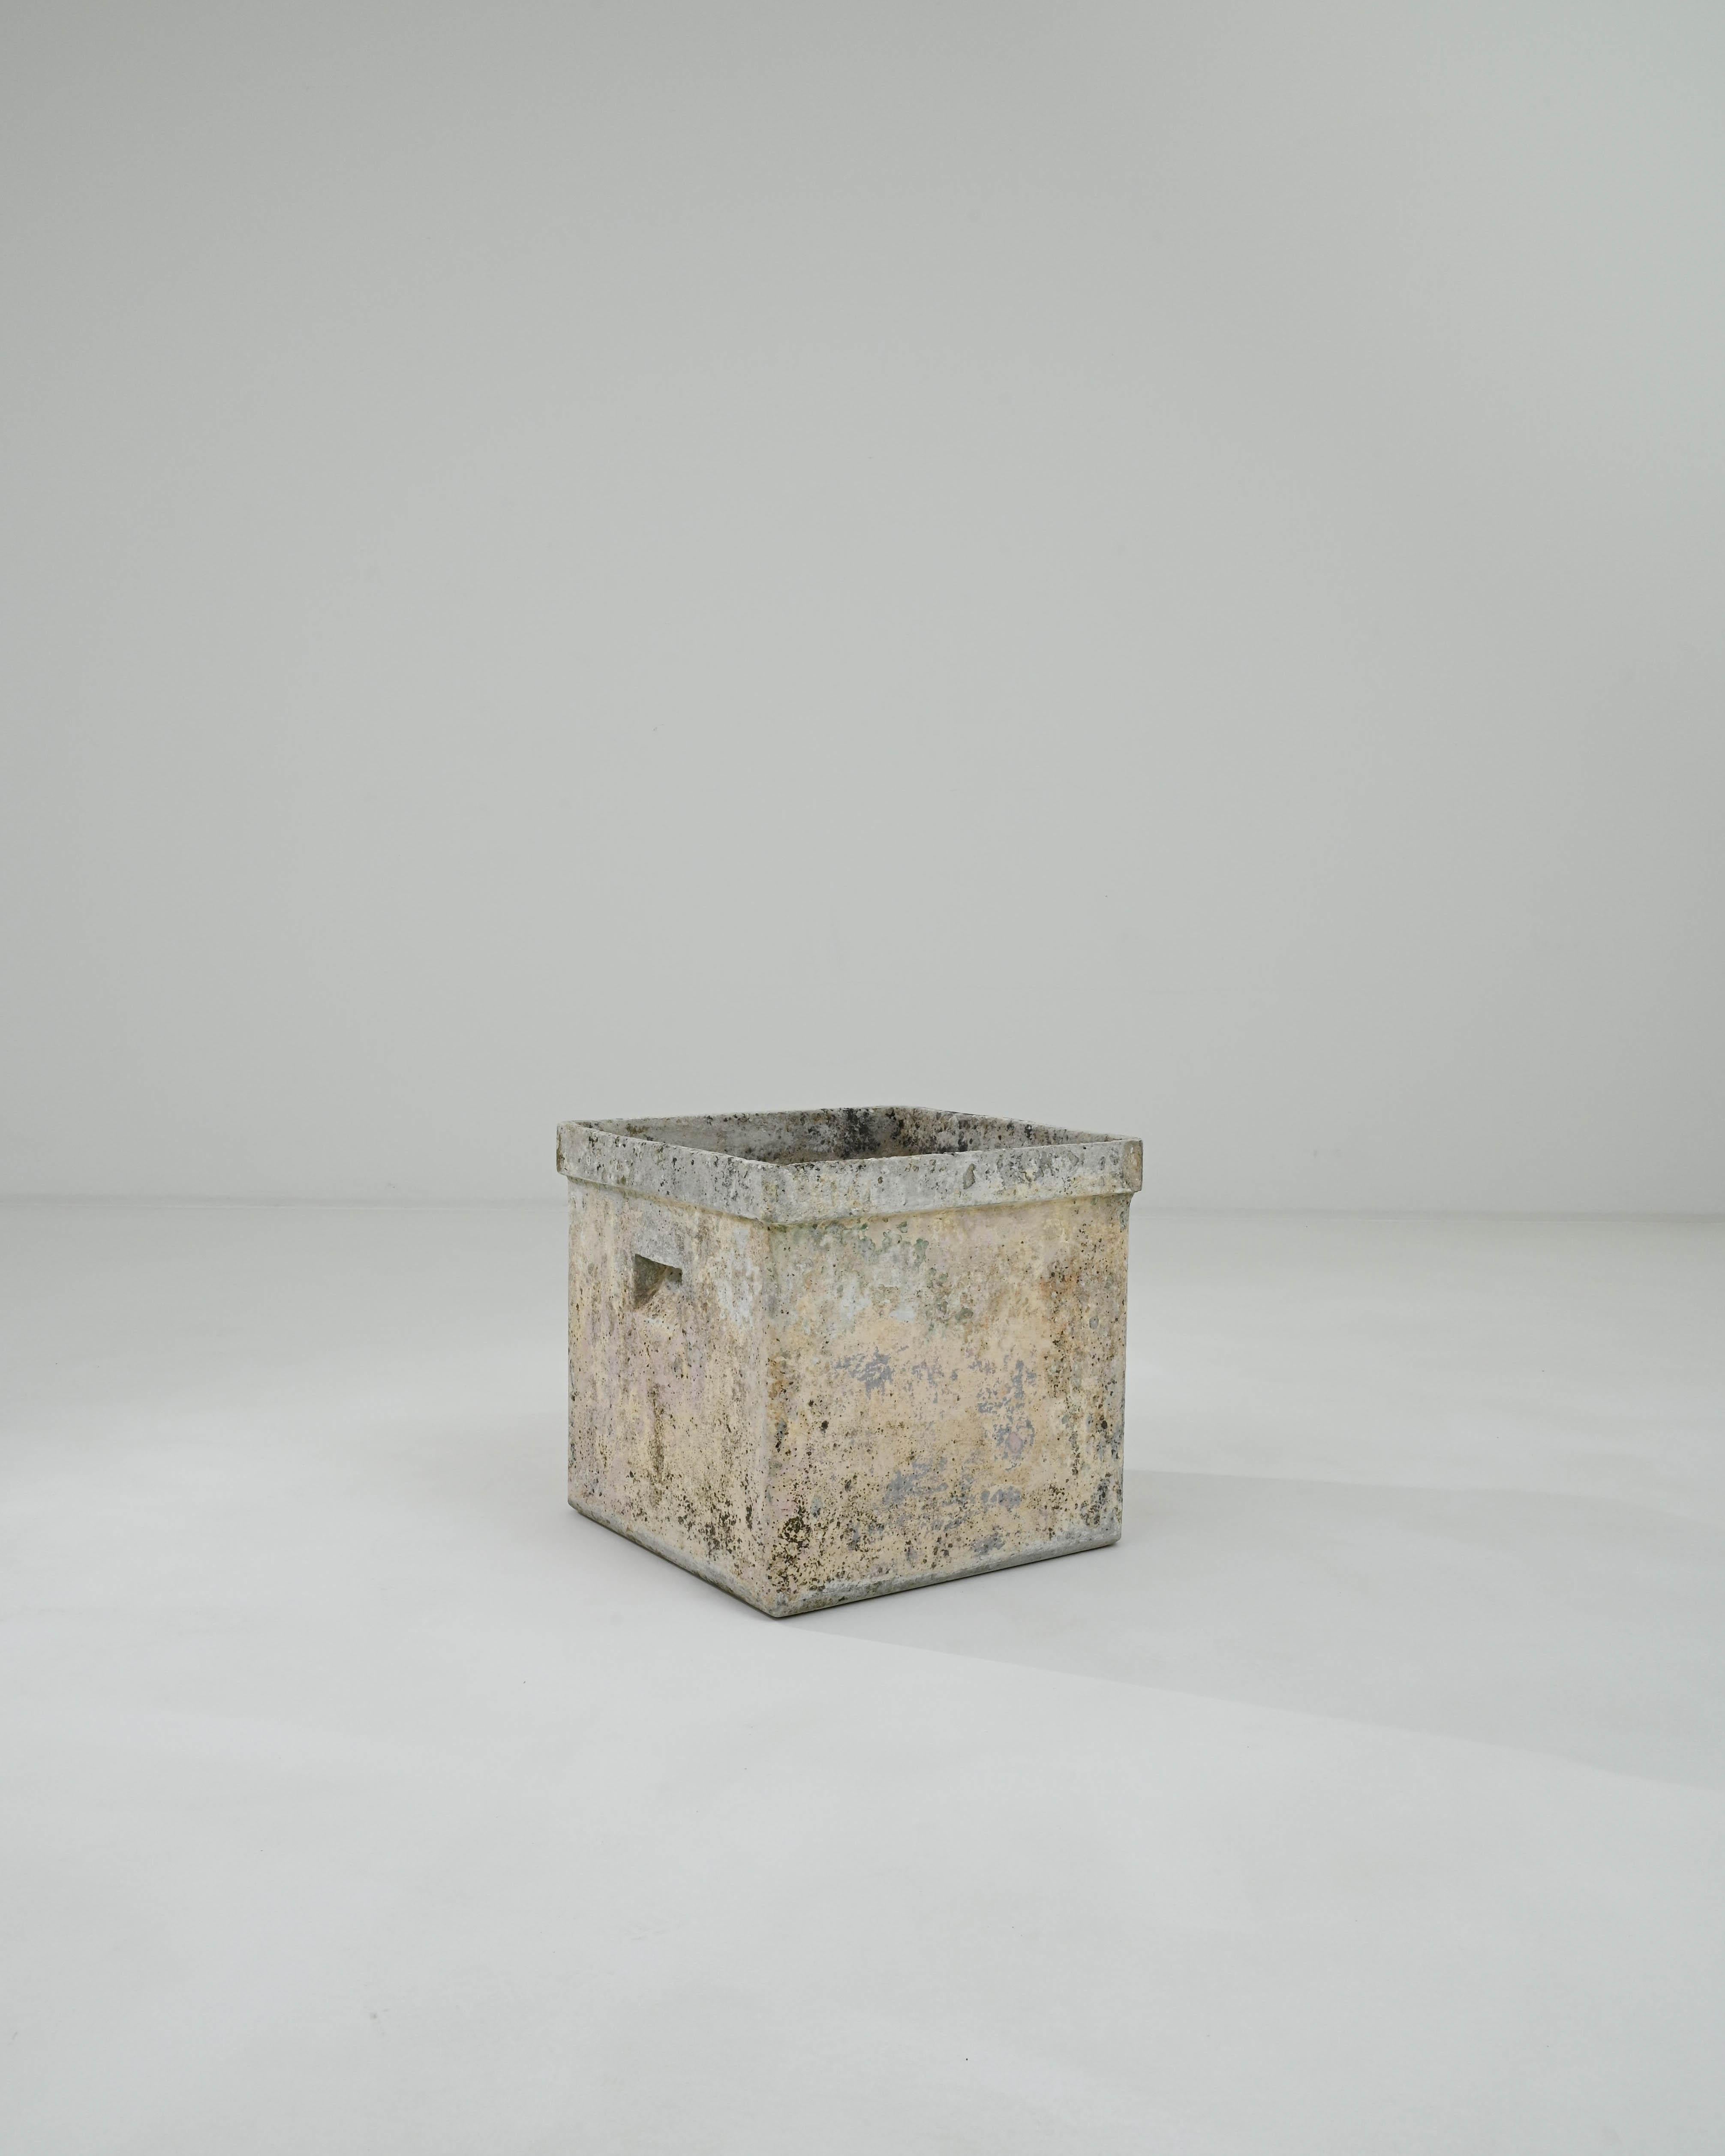 A minimalist shape combined with an evocative natural patina gives this vintage planter a unique personality. Made in France in the 1960s, the design has a simple appeal: a square container, unembellished save for the slight protrusion of the lip